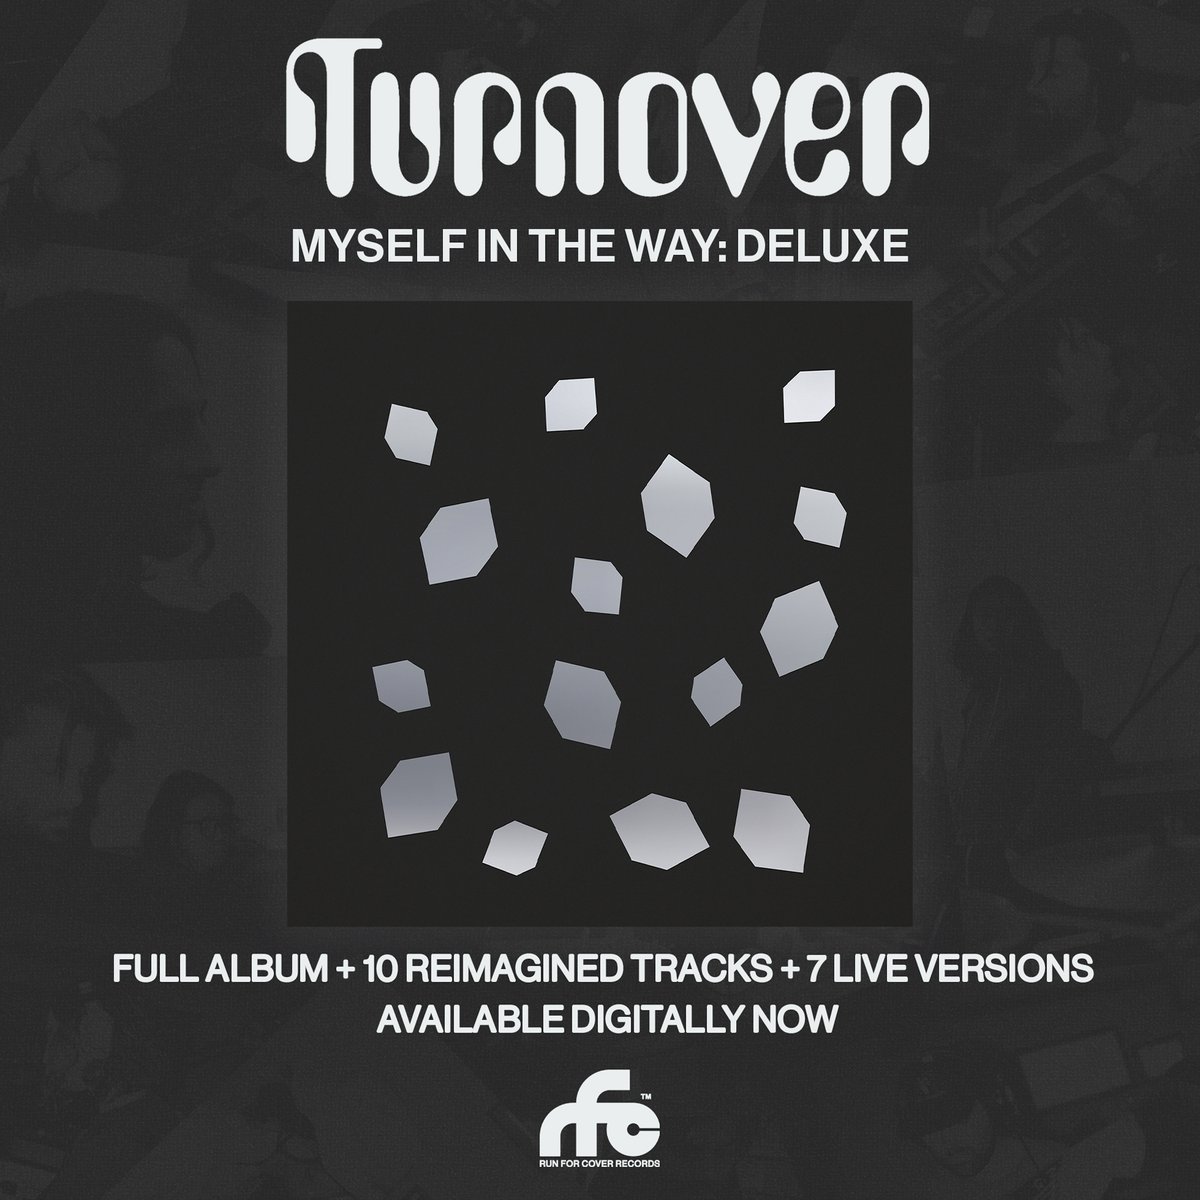 The Deluxe version of @turnoverva's MYSELF IN THE WAY is out digitally today! Featuring remixes, reimagined tracks, and live versions. Listen & pre-order vinyl here: lnk.to/MITW-Deluxe